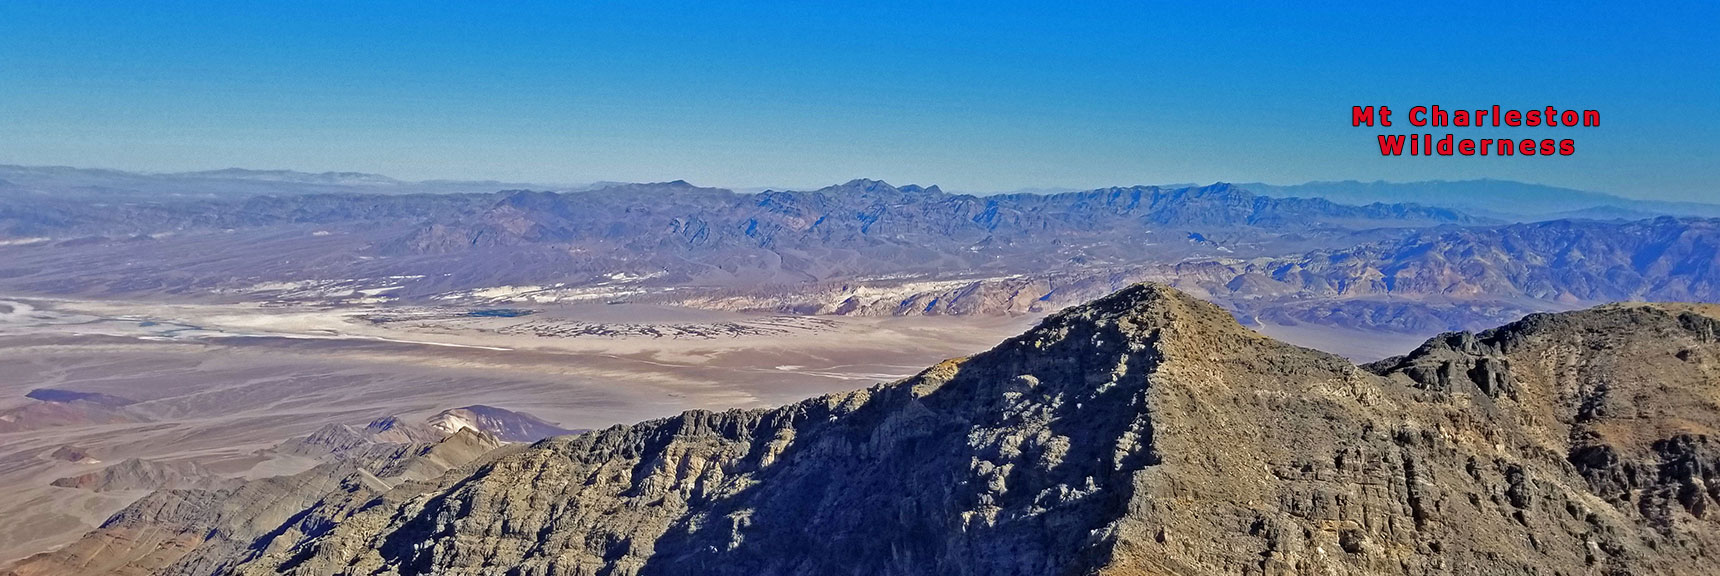 View East Across Death Valley to Mt. Charleston Wilderness in Distance | Aguereberry Point | Panamint Mountain Range | Death Valley National Park, California